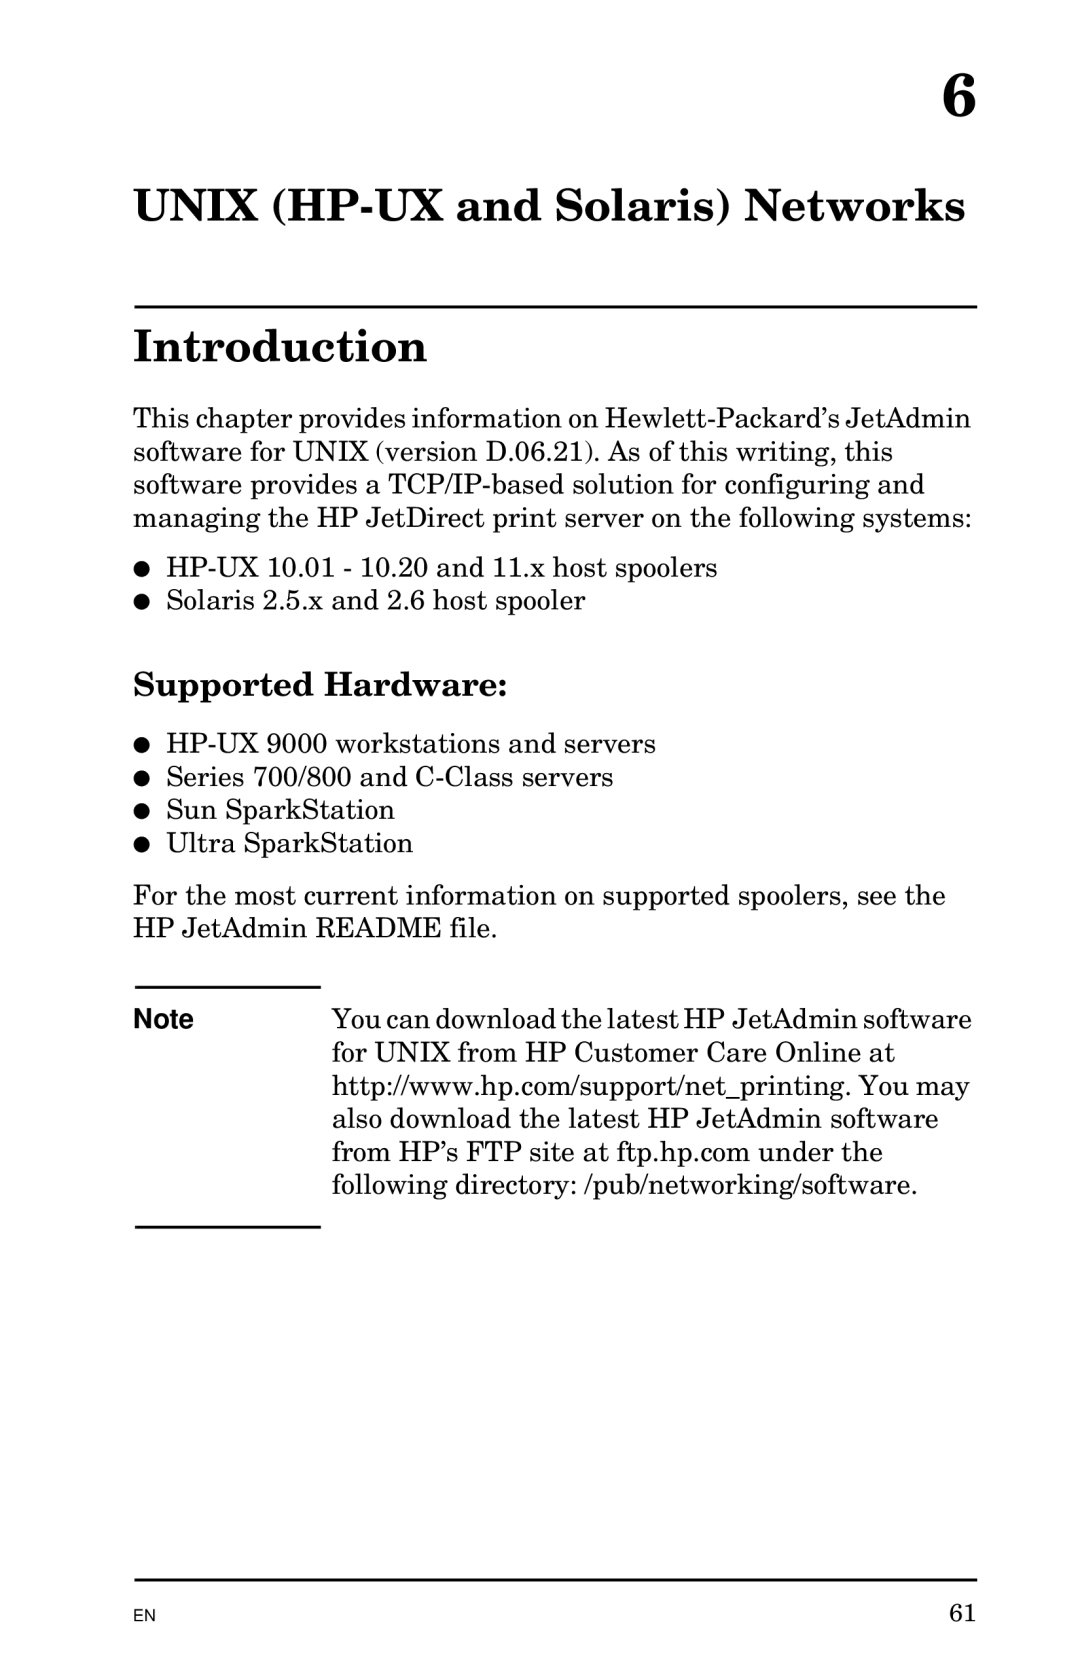 HP Jetadmin Software for OS/2 manual Unix HP-UX and Solaris Networks Introduction, Supported Hardware 